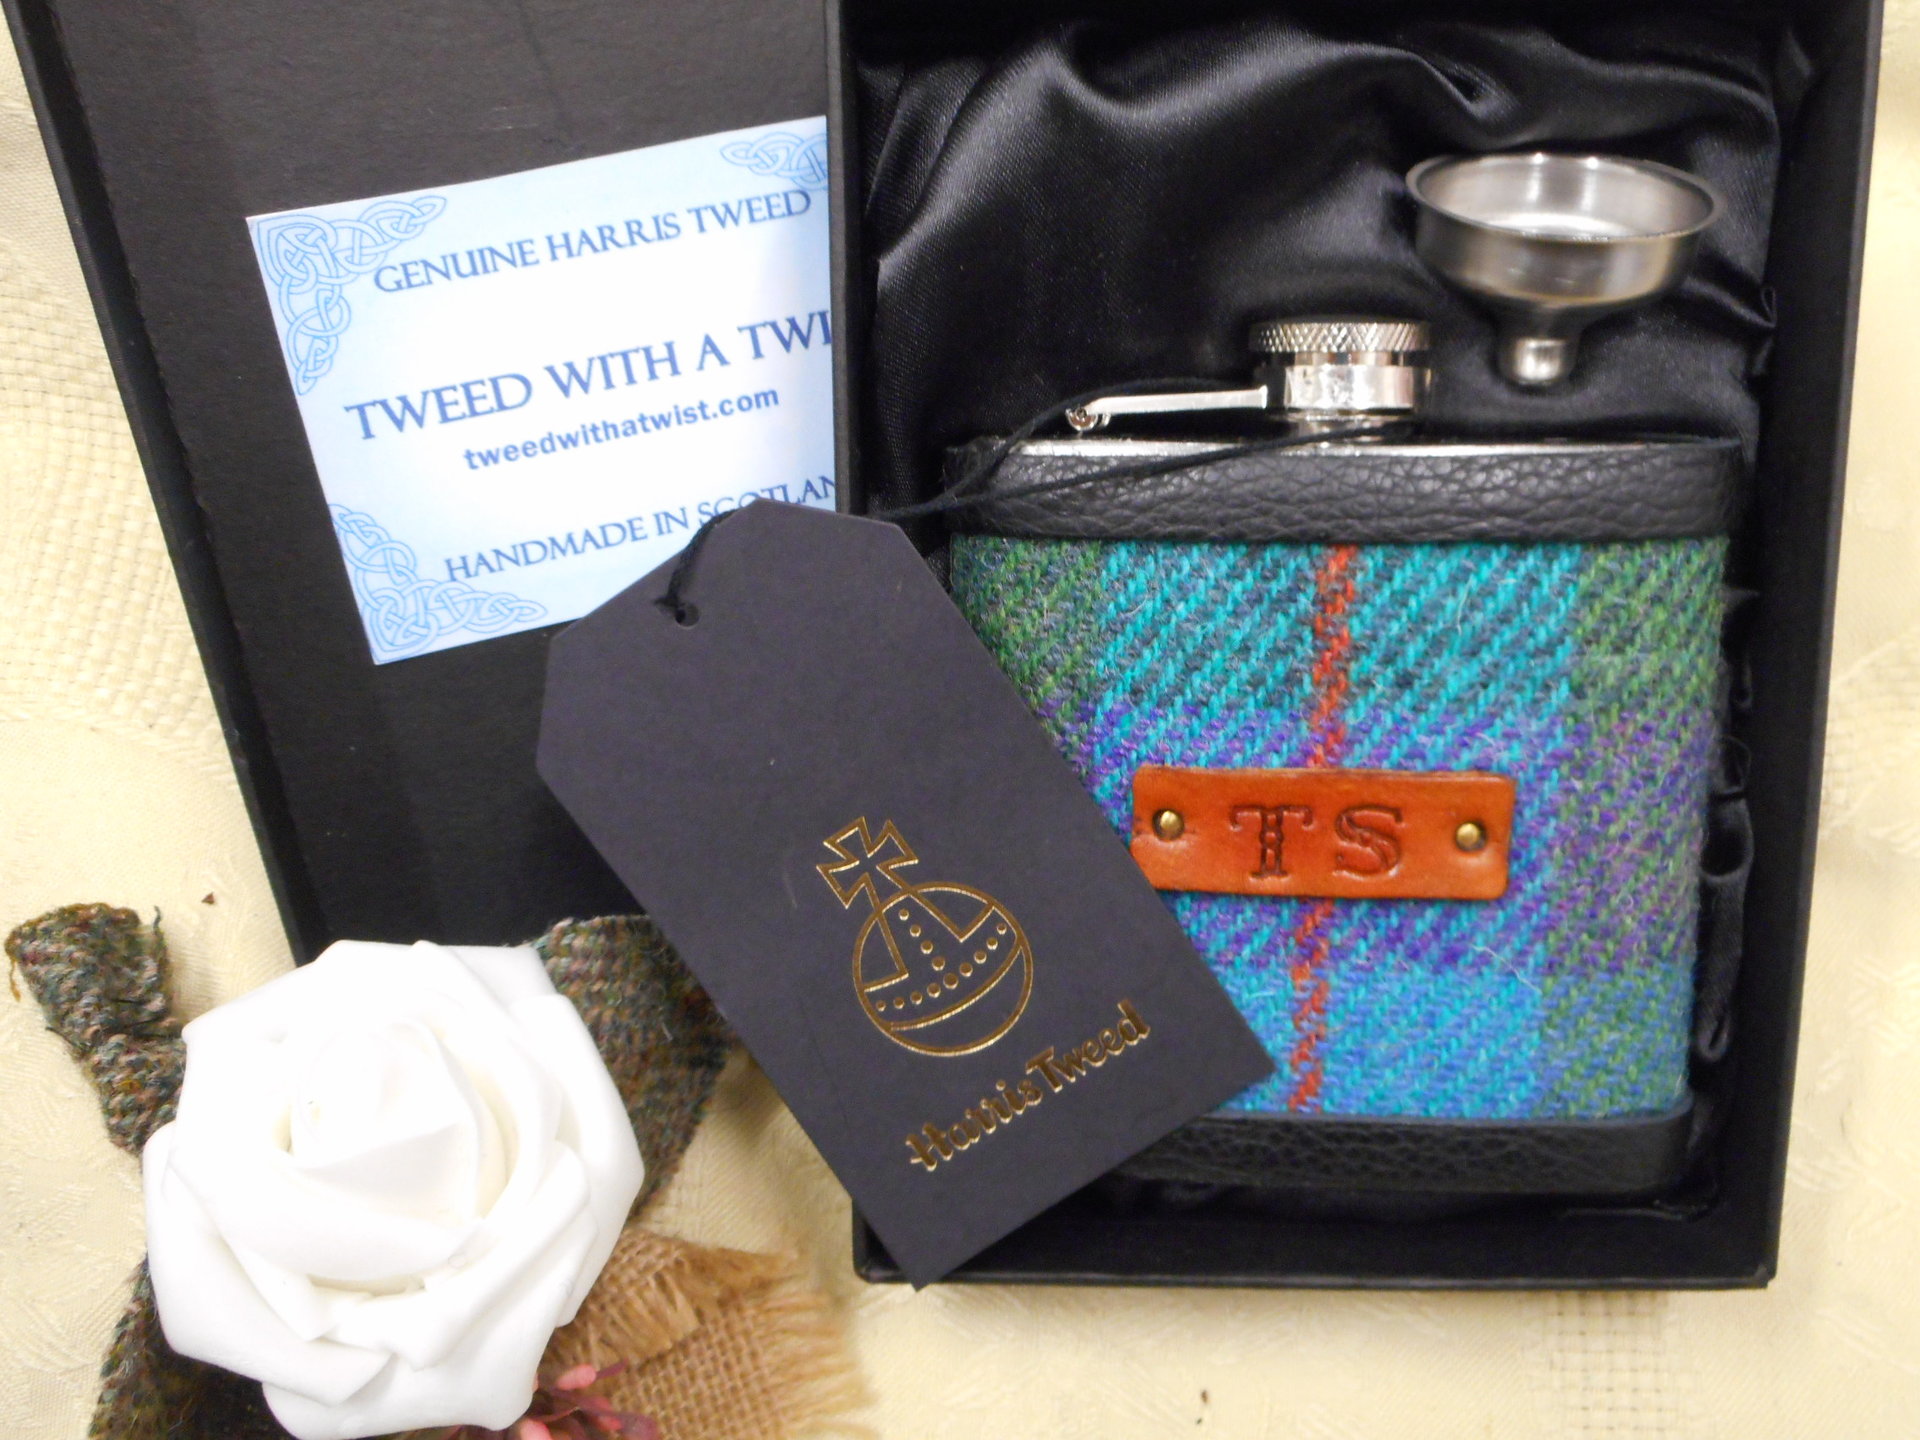 Personalised Monogrammed Harris Tweed hip flask with 1-3 initials Scottish luxury gift for Christmas , birthday, Fathers Day or retirement choose any tweed